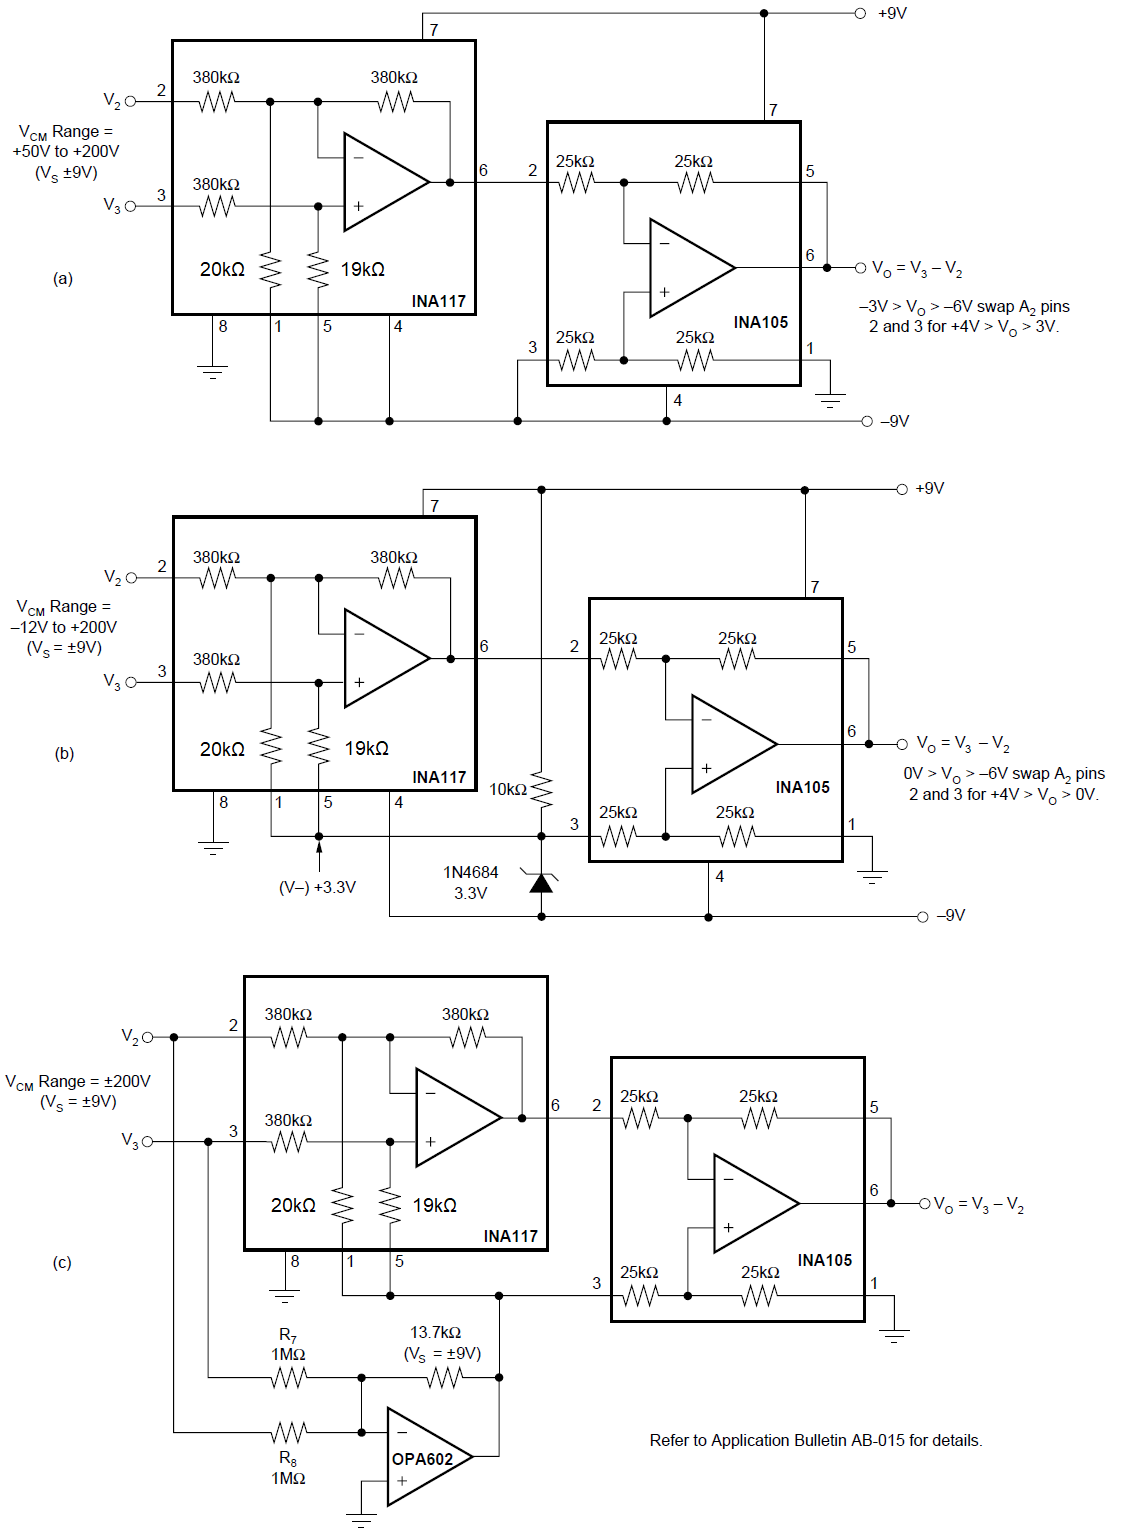 INA117 Offsetting or Boosting
                    Common-mode Voltage Range for Reduced Power-supply Voltage Operation